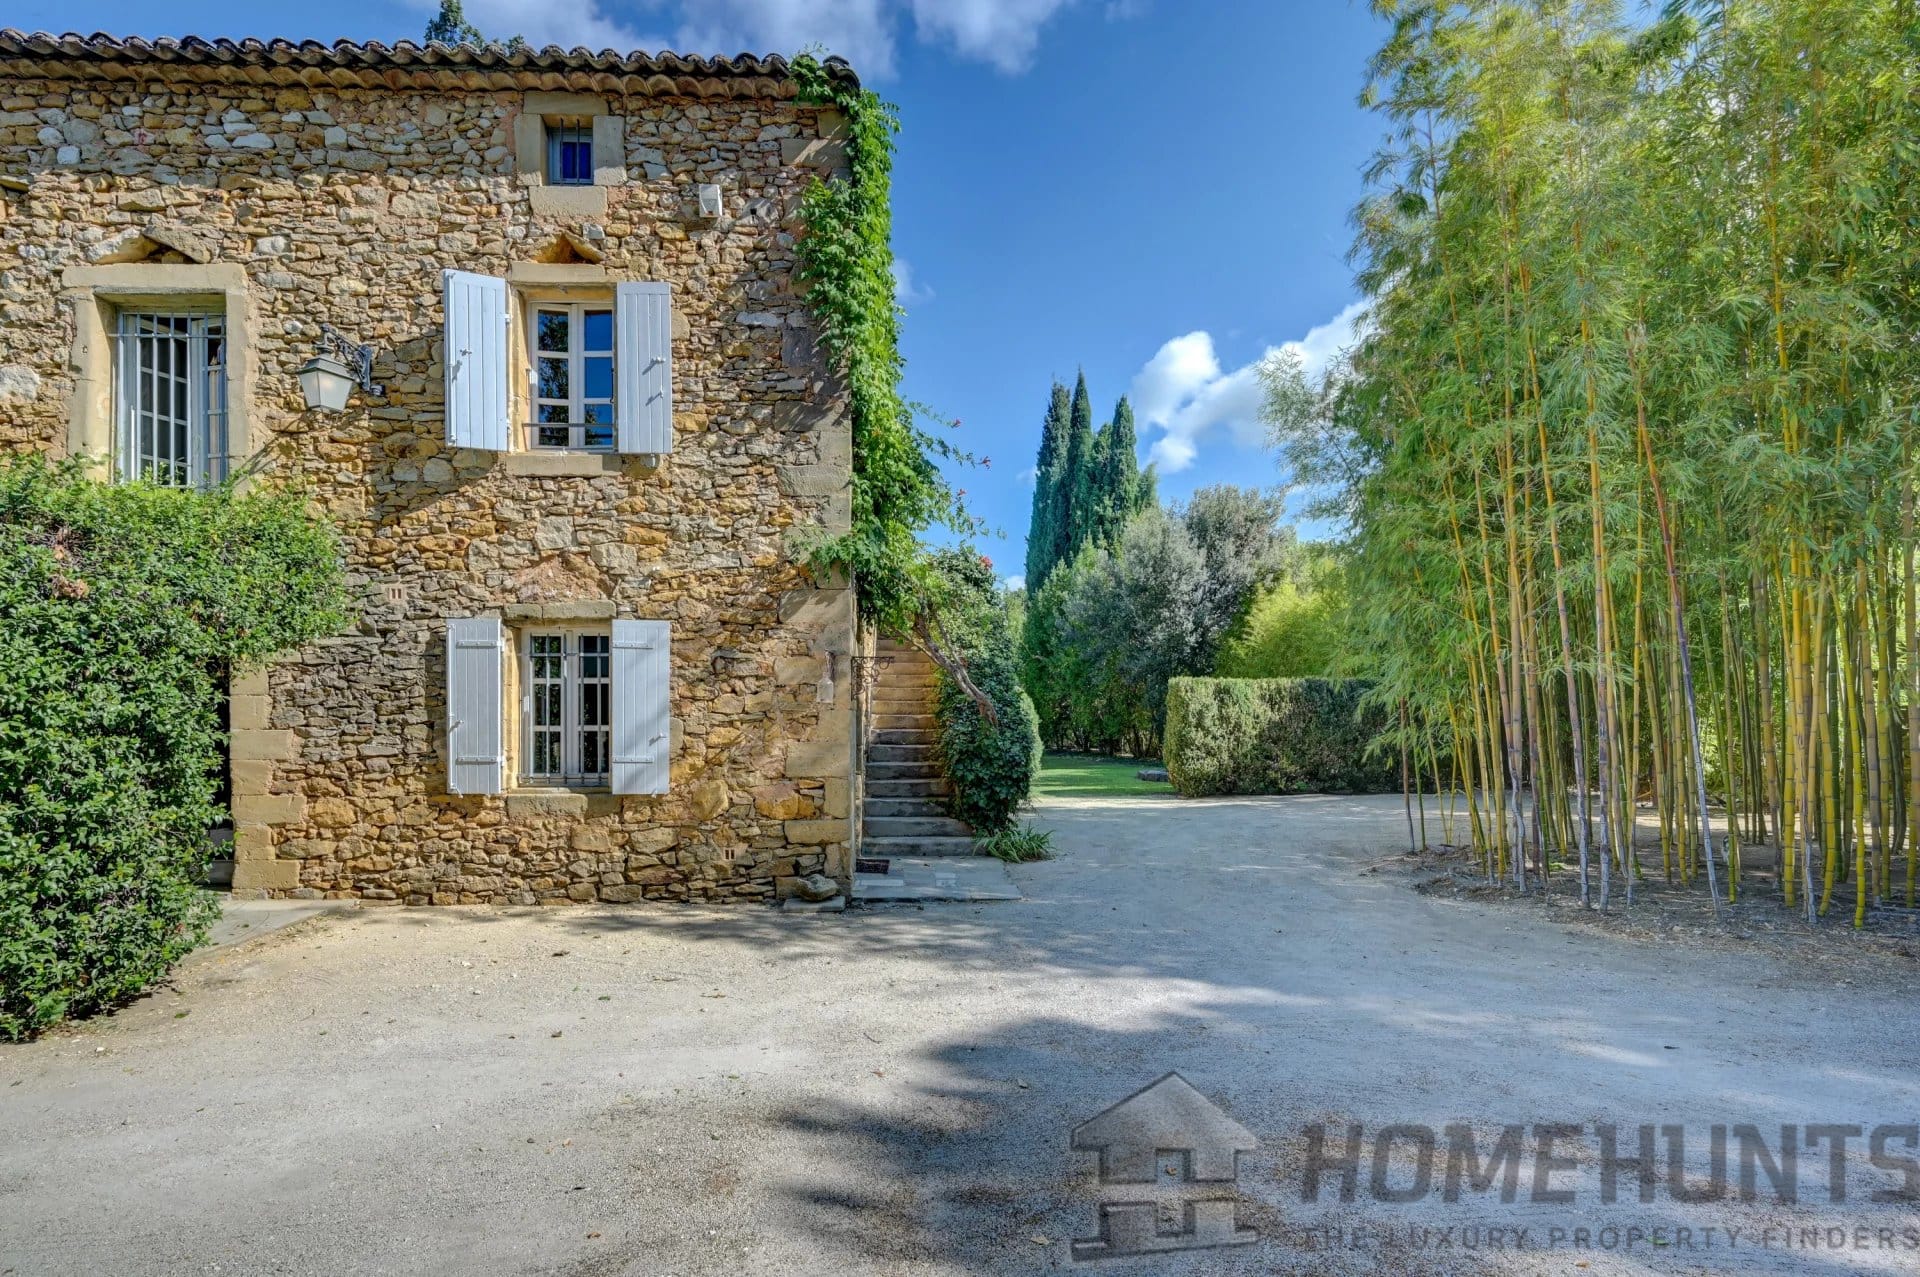 Villa/House For Sale in Uzes 4